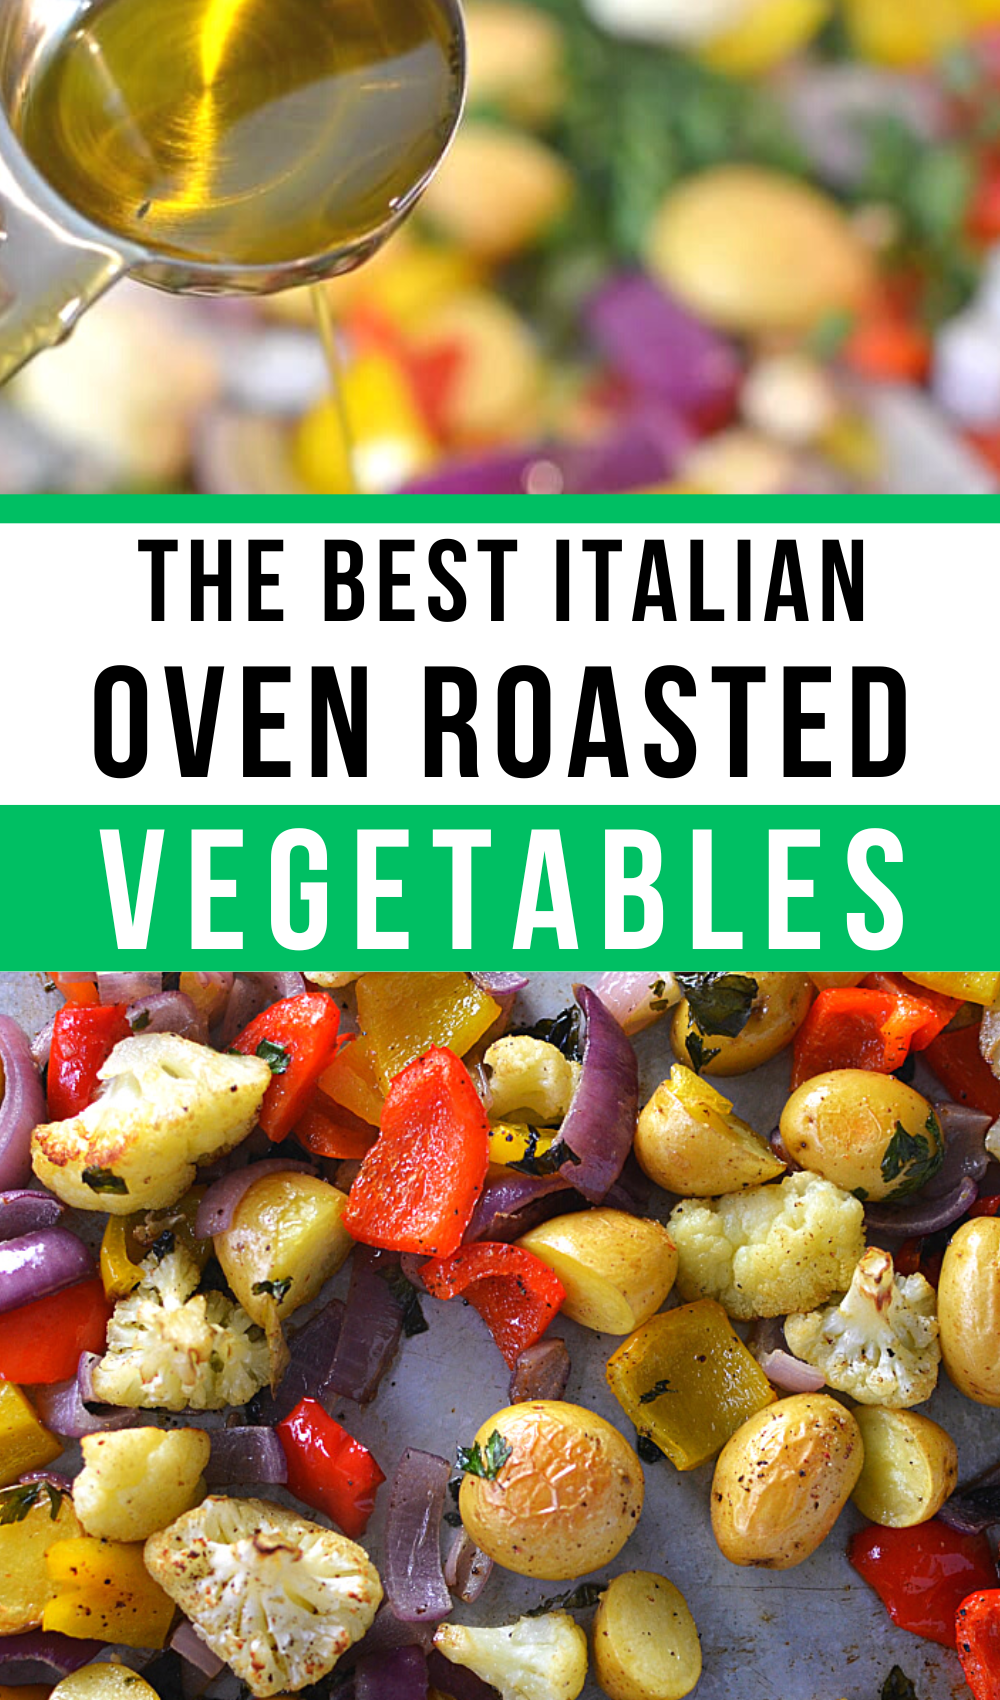 The Best Italian Oven Roasted Vegetables Recipe